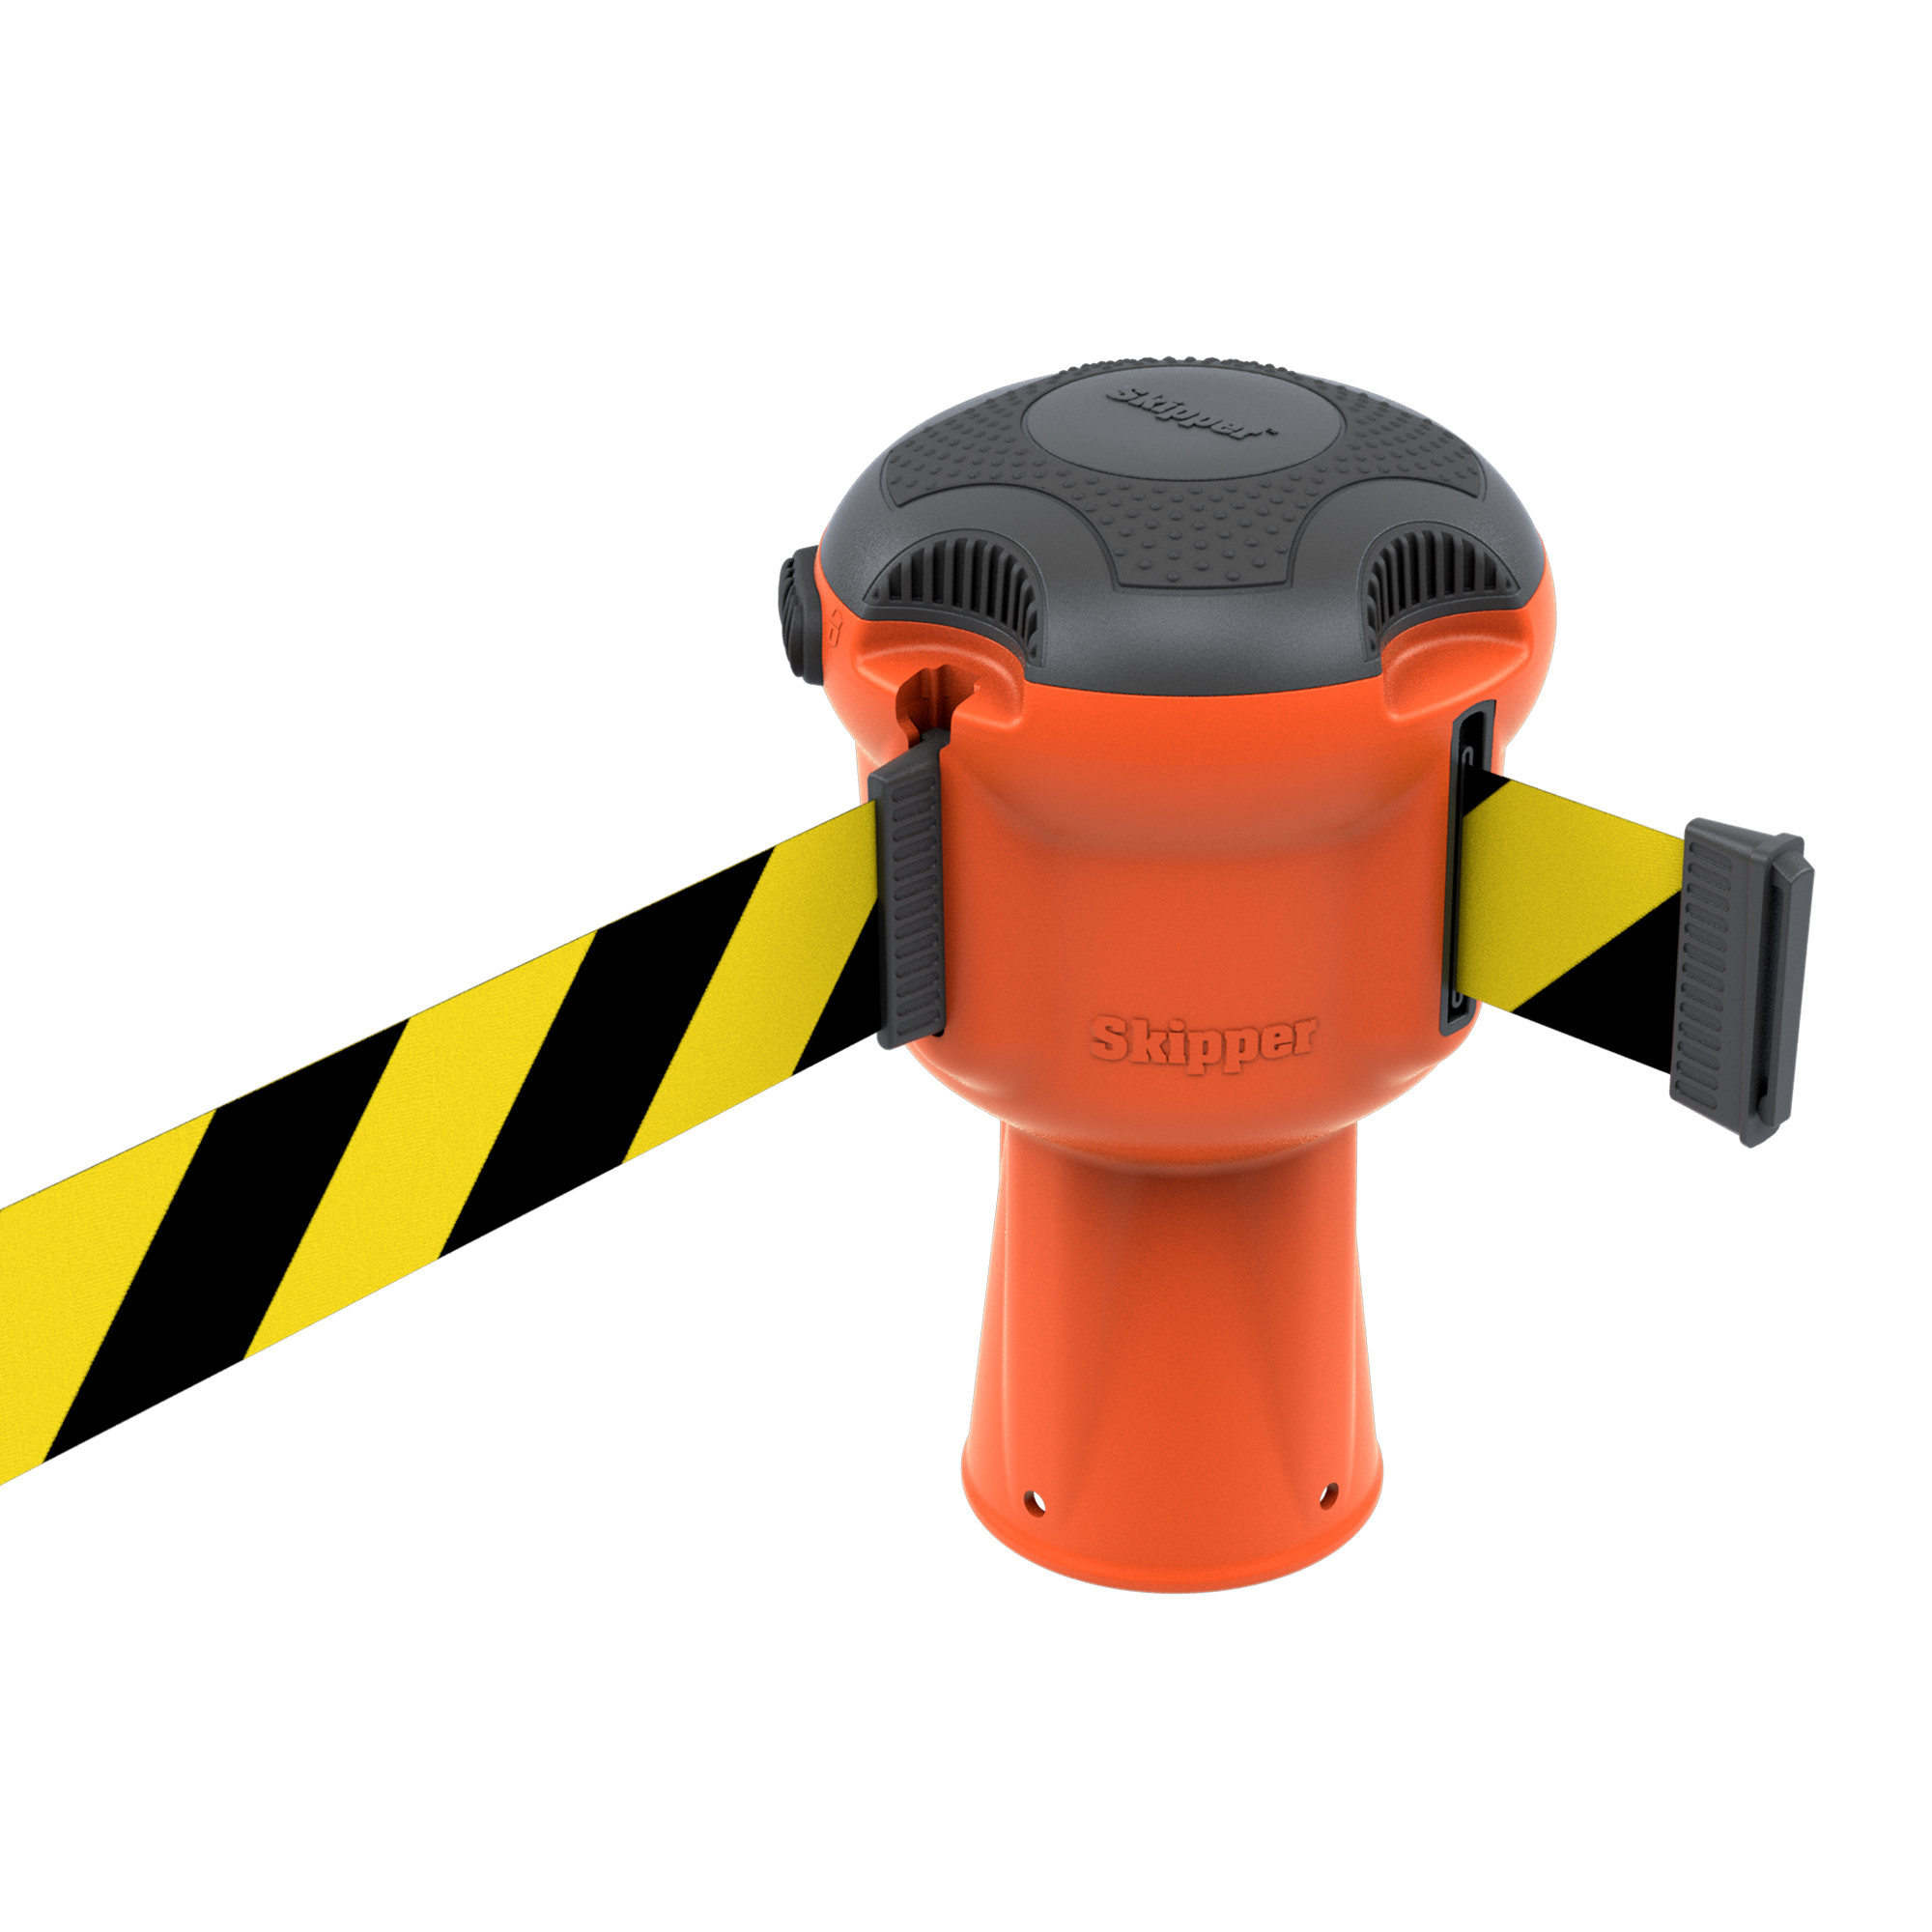 Skipper Retractable Unit For Barrier (Orange with black/yellow tape)